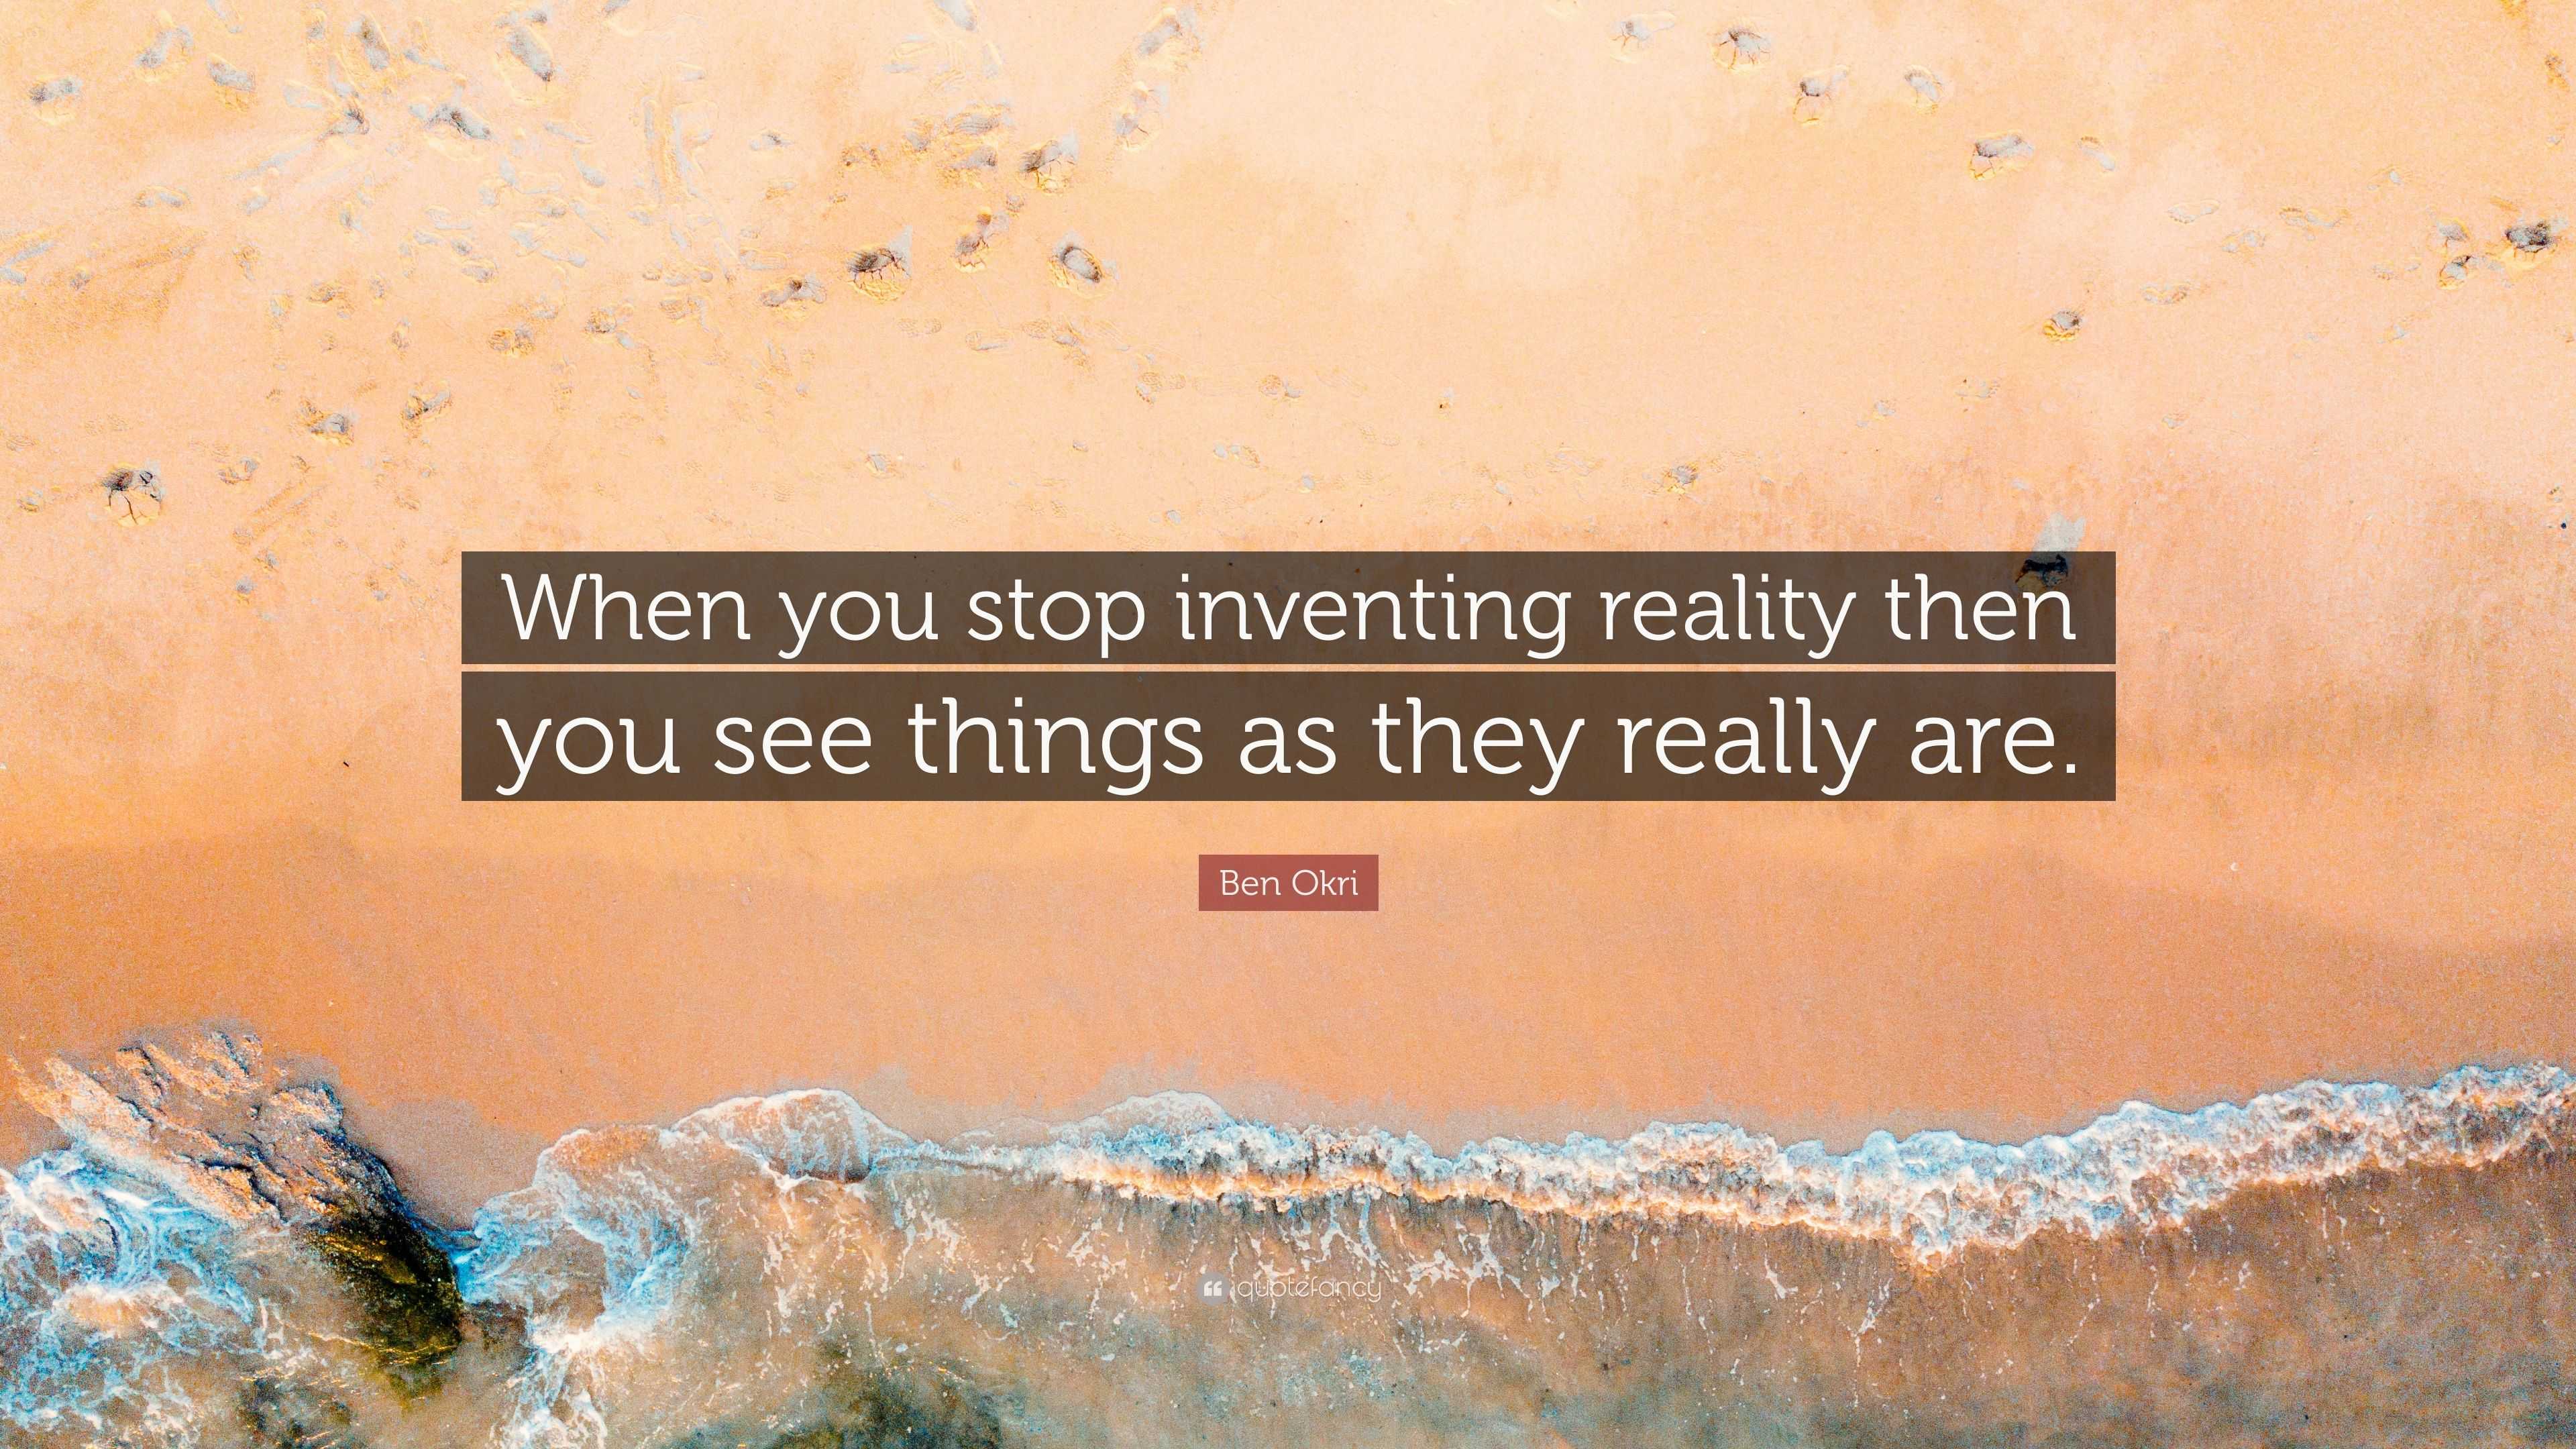 Ben Okri Quote: "When you stop inventing reality then you see things as they really are." (6 ...